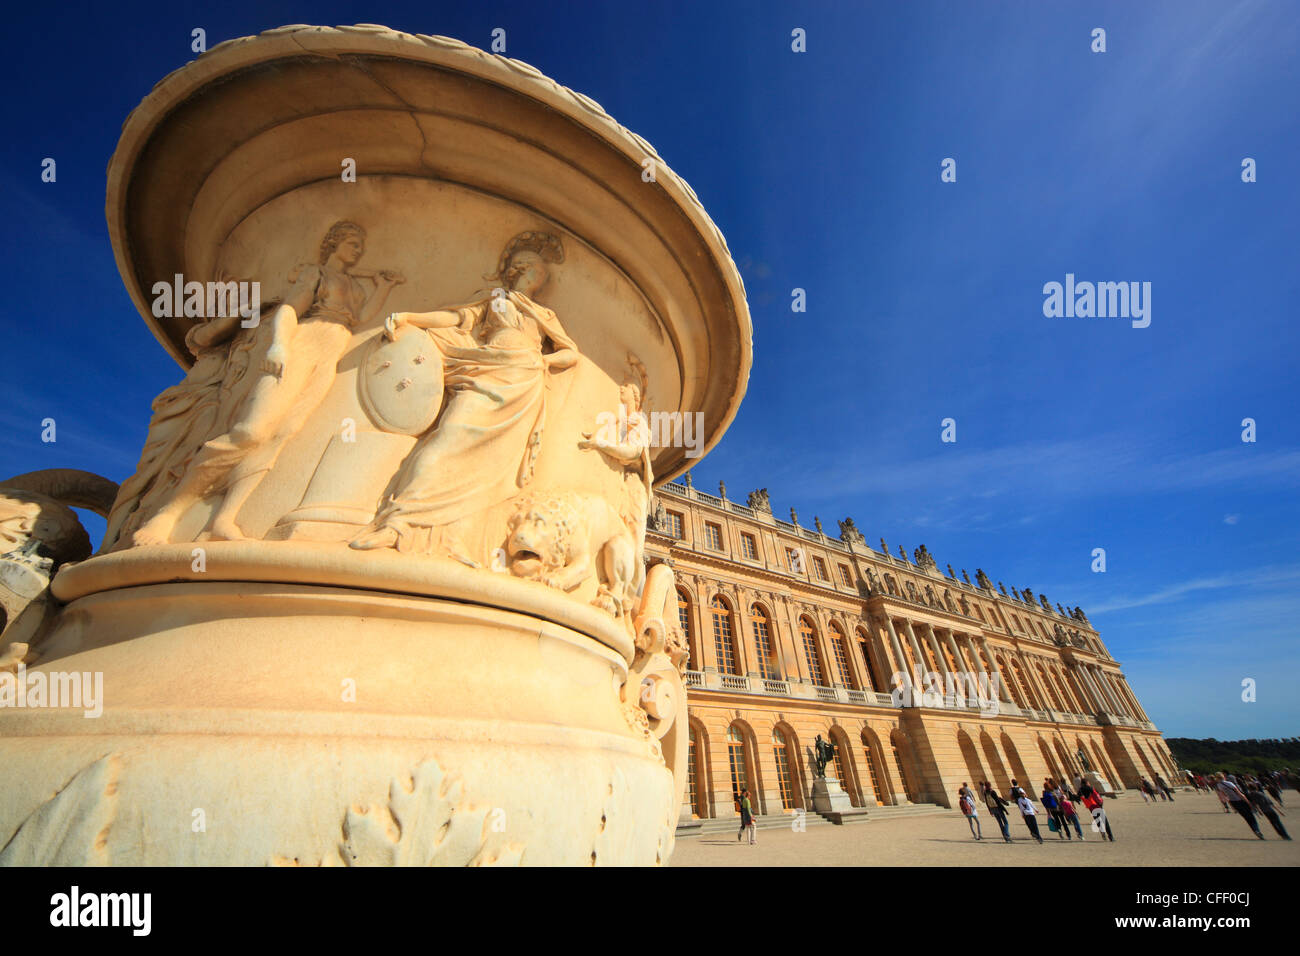 Sculptured vases in the Palace Gardens, Chateau de Versailles, UNESCO World Heritage Site, Versailles, France, Europe Stock Photo